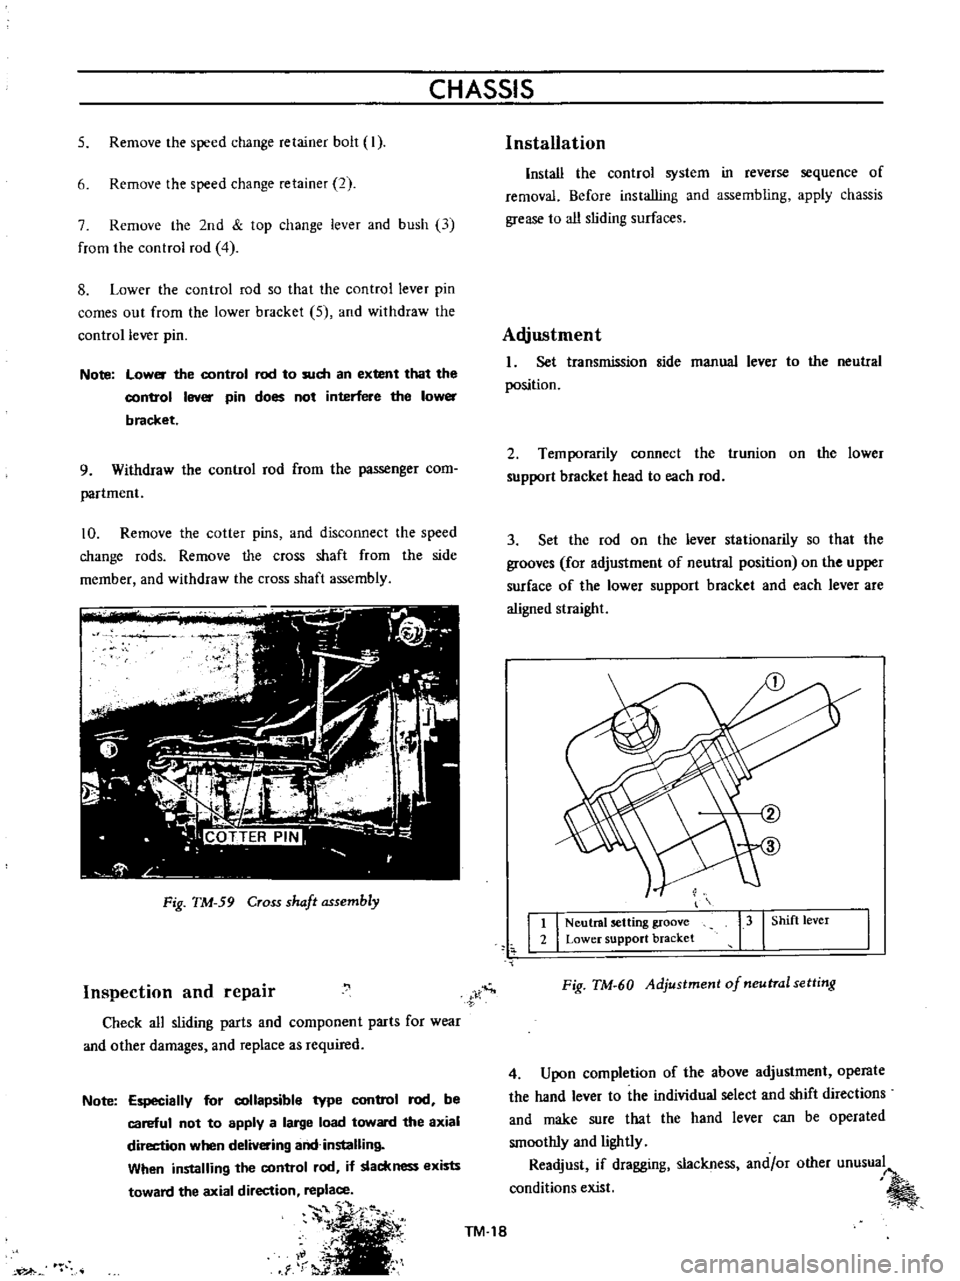 DATSUN B110 1973  Service Service Manual 
CHASSIS

5 
Remove 
the

speed 
change 
retainer 
bolt

I

6 
Remove 
the

speed 
change 
retainer 
2

7 
Remove 
the 
2nd

top 
change 
lever 
and 
bush

13

from 
the 
control 
rod 
4

8 
Lower 
th